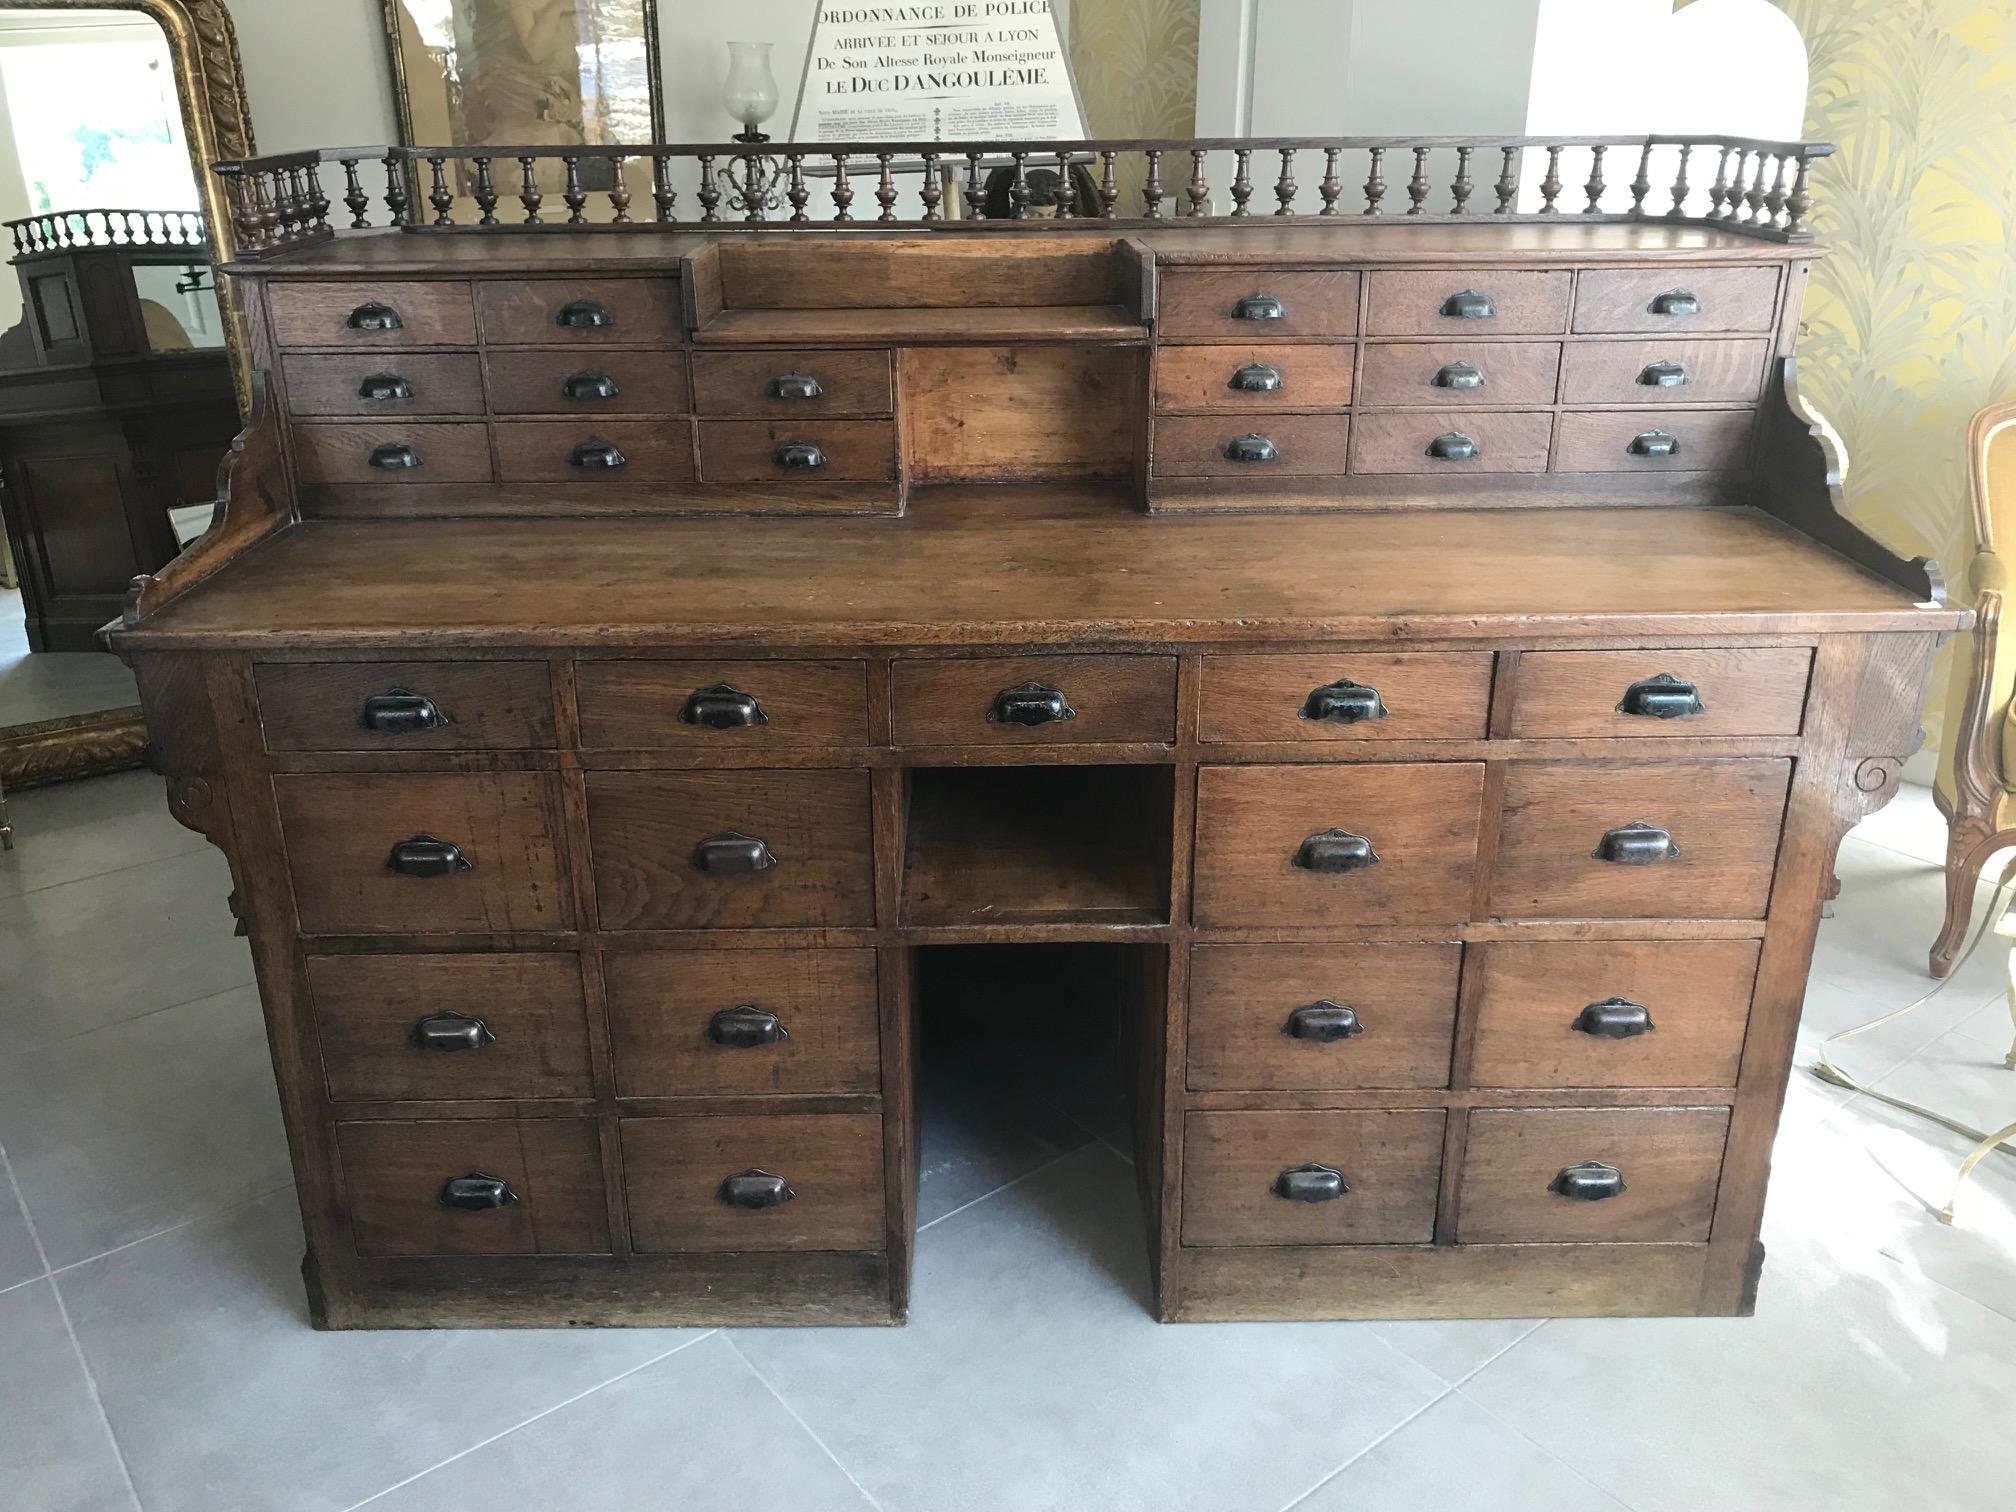 Exceptional French oak antique apothecary and pharmacy cabinet from the 1900s.
Glass on the outside part. On the inside, many drawers.
Beautiful oak gallery. Very good condition for this kind of cabinet.
Very rare piece!